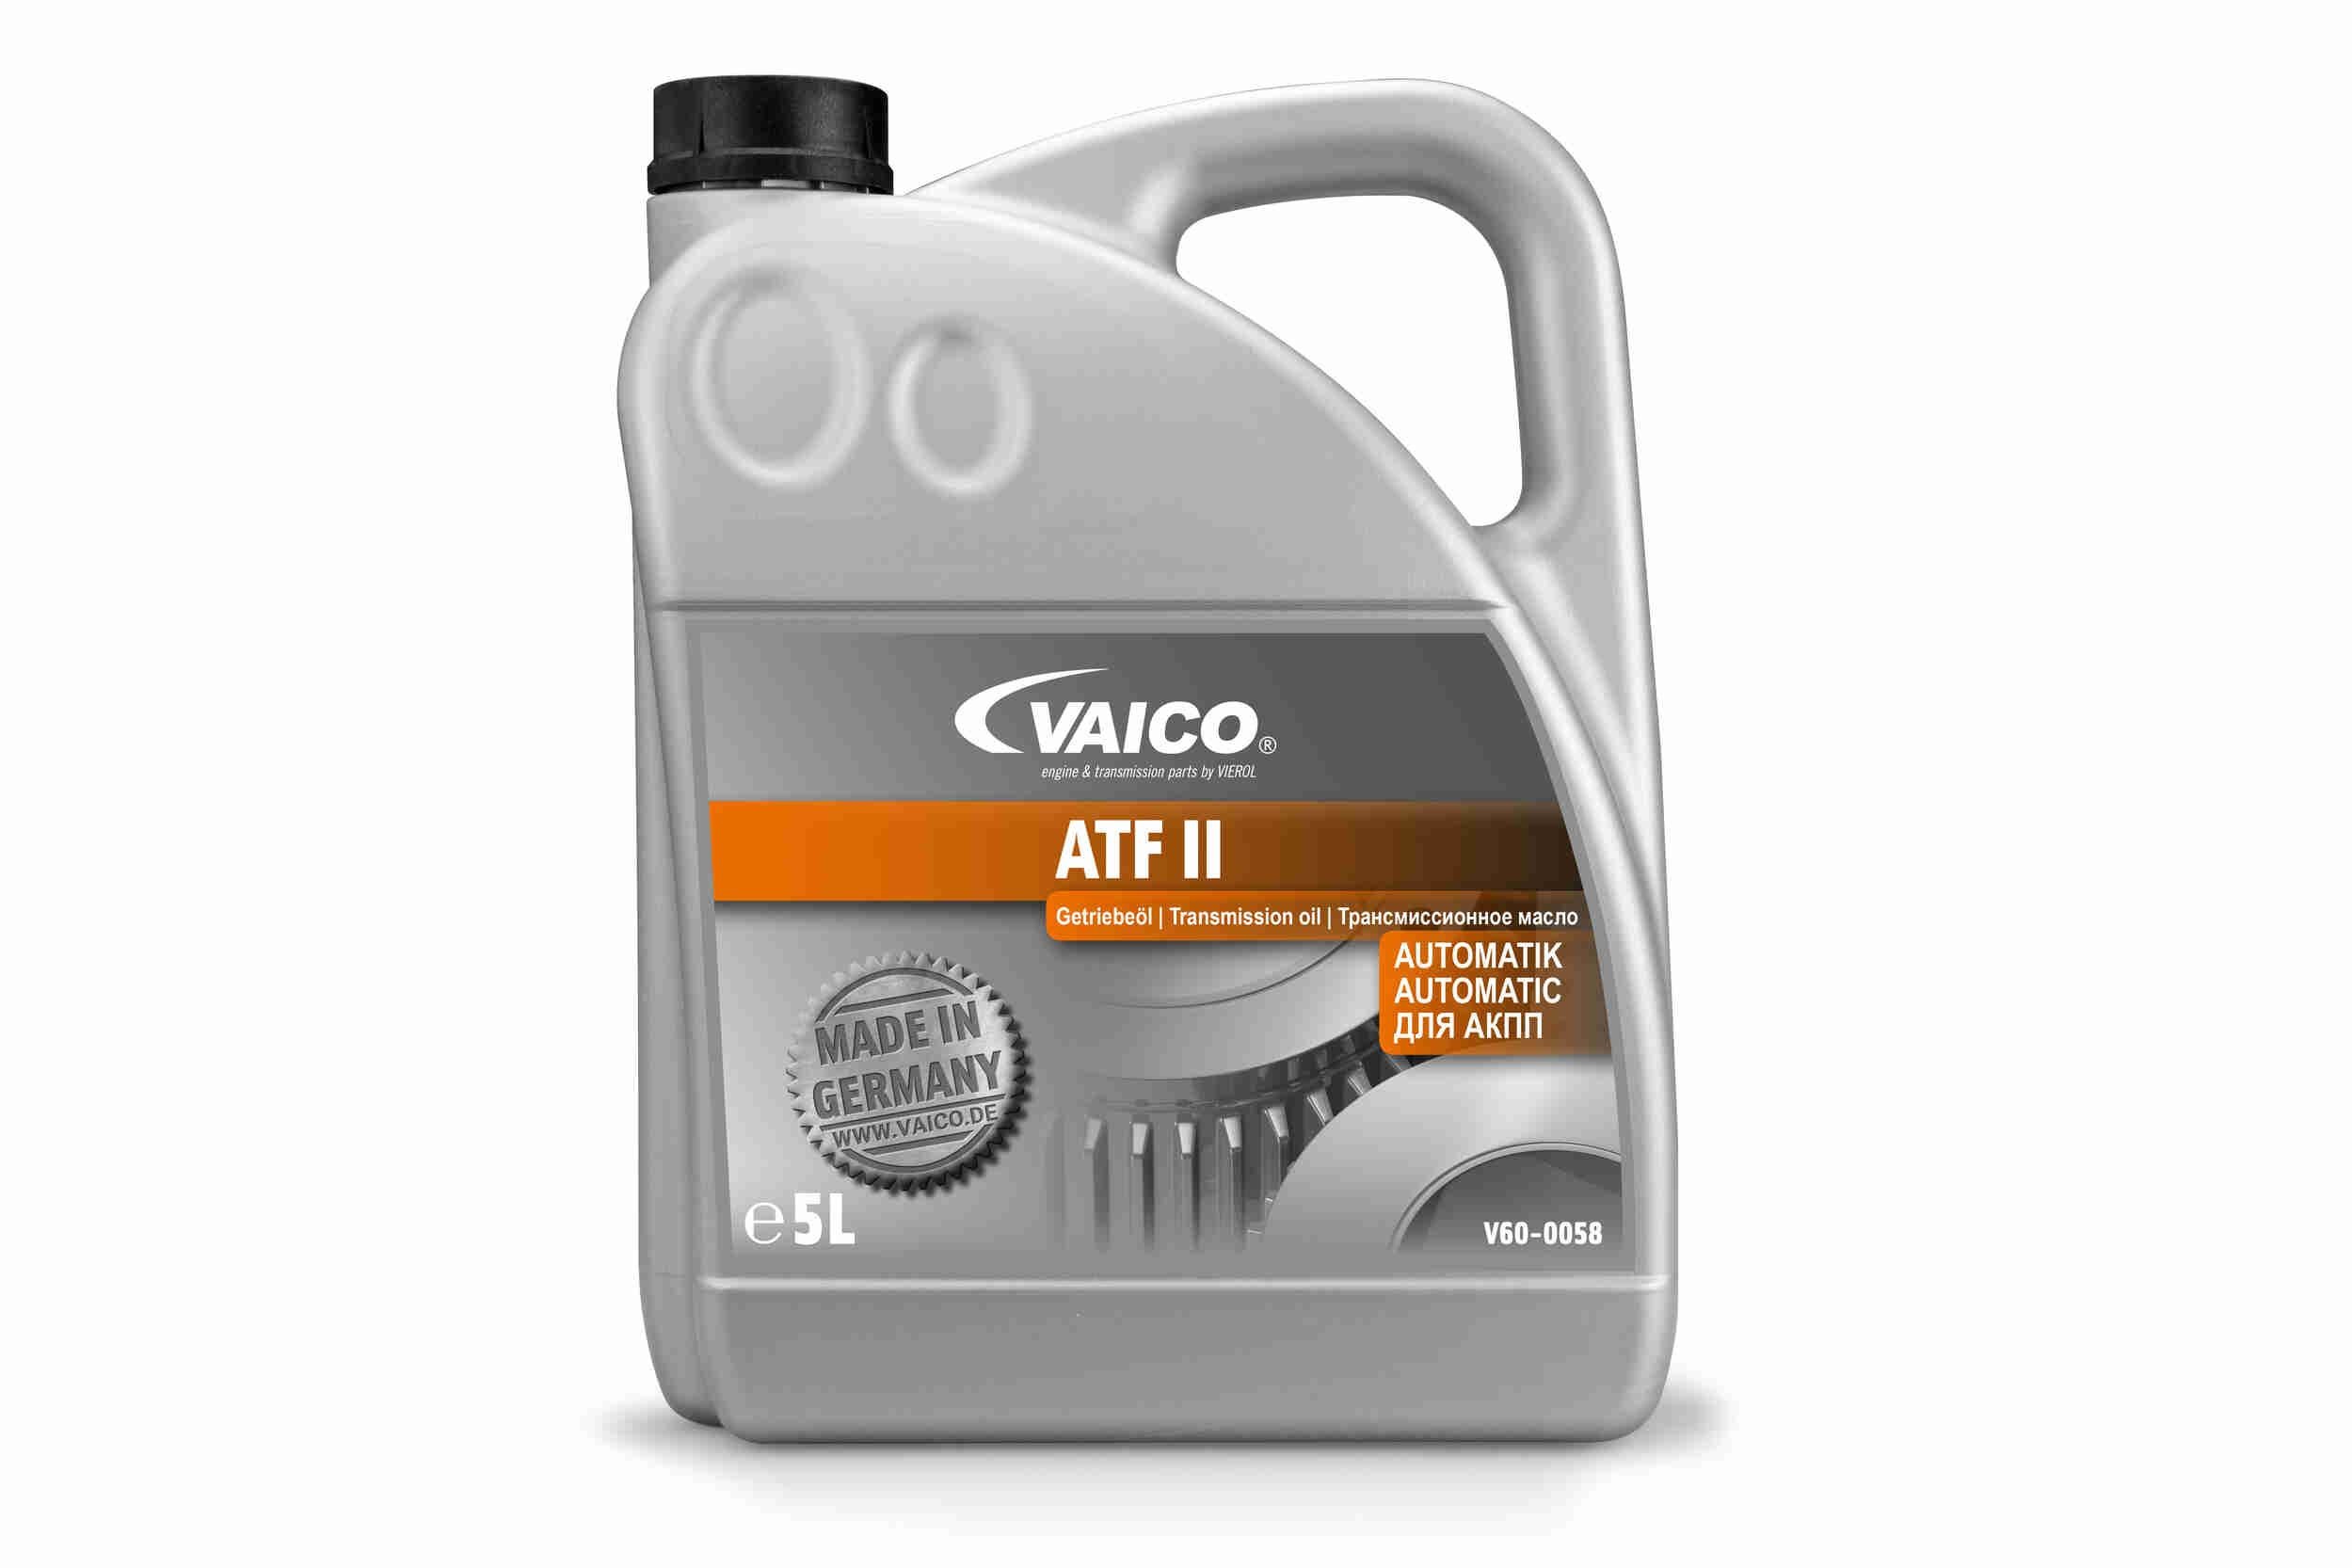 V60-0058 Automatic transmission fluid CAT TO-2 VAICO ATF II, 5l, red